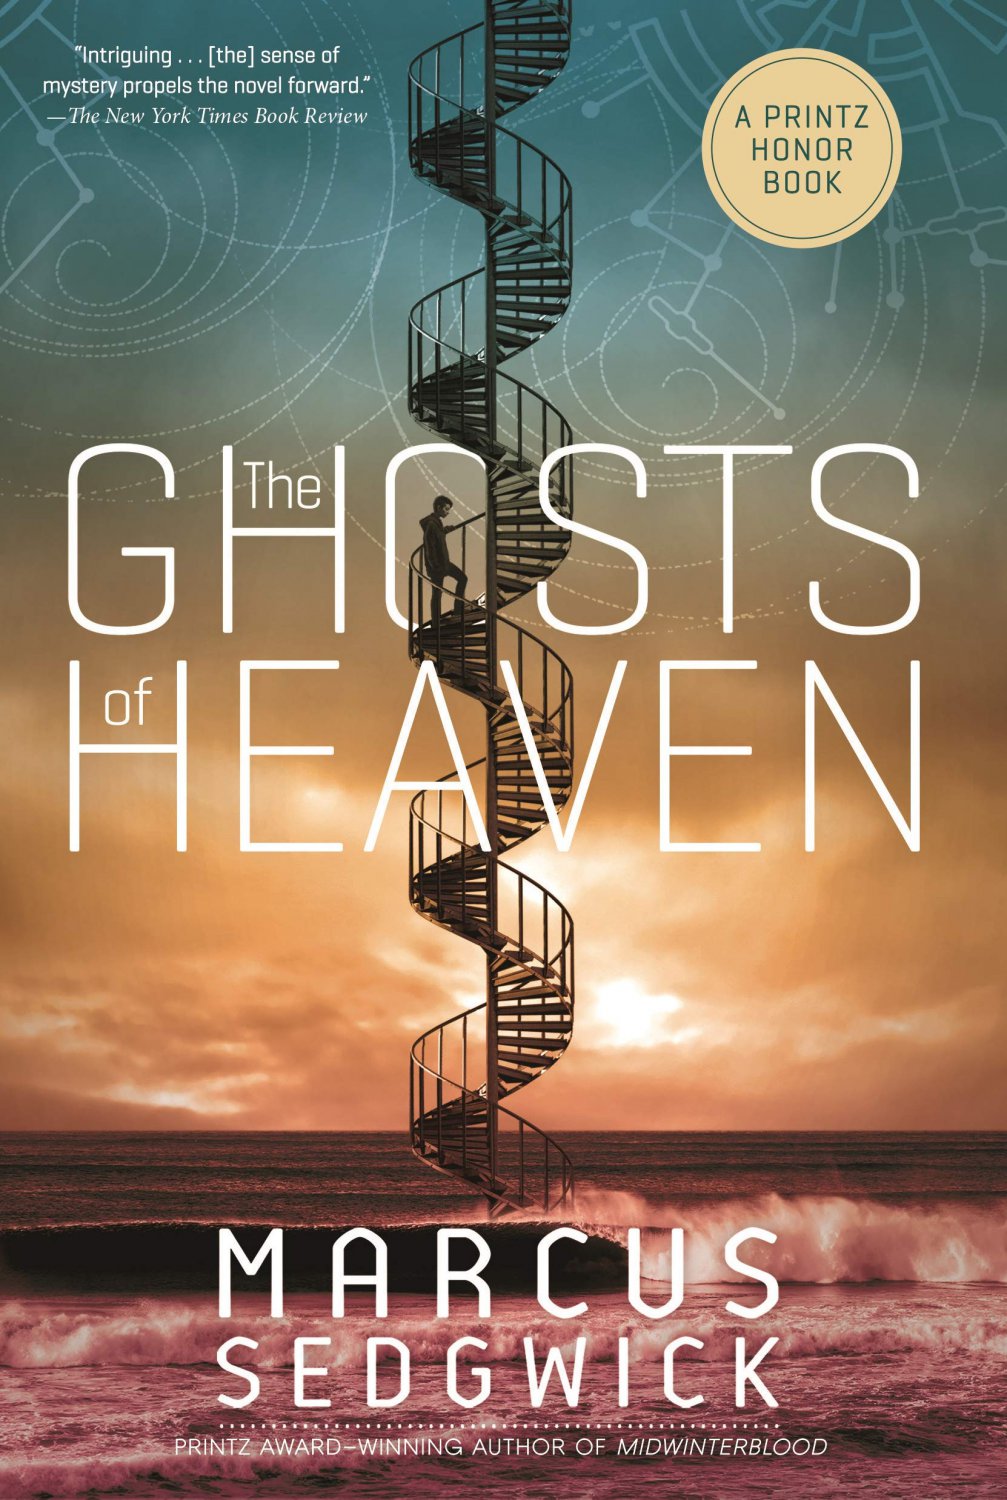 The Ghosts of Heaven Hardcover Book